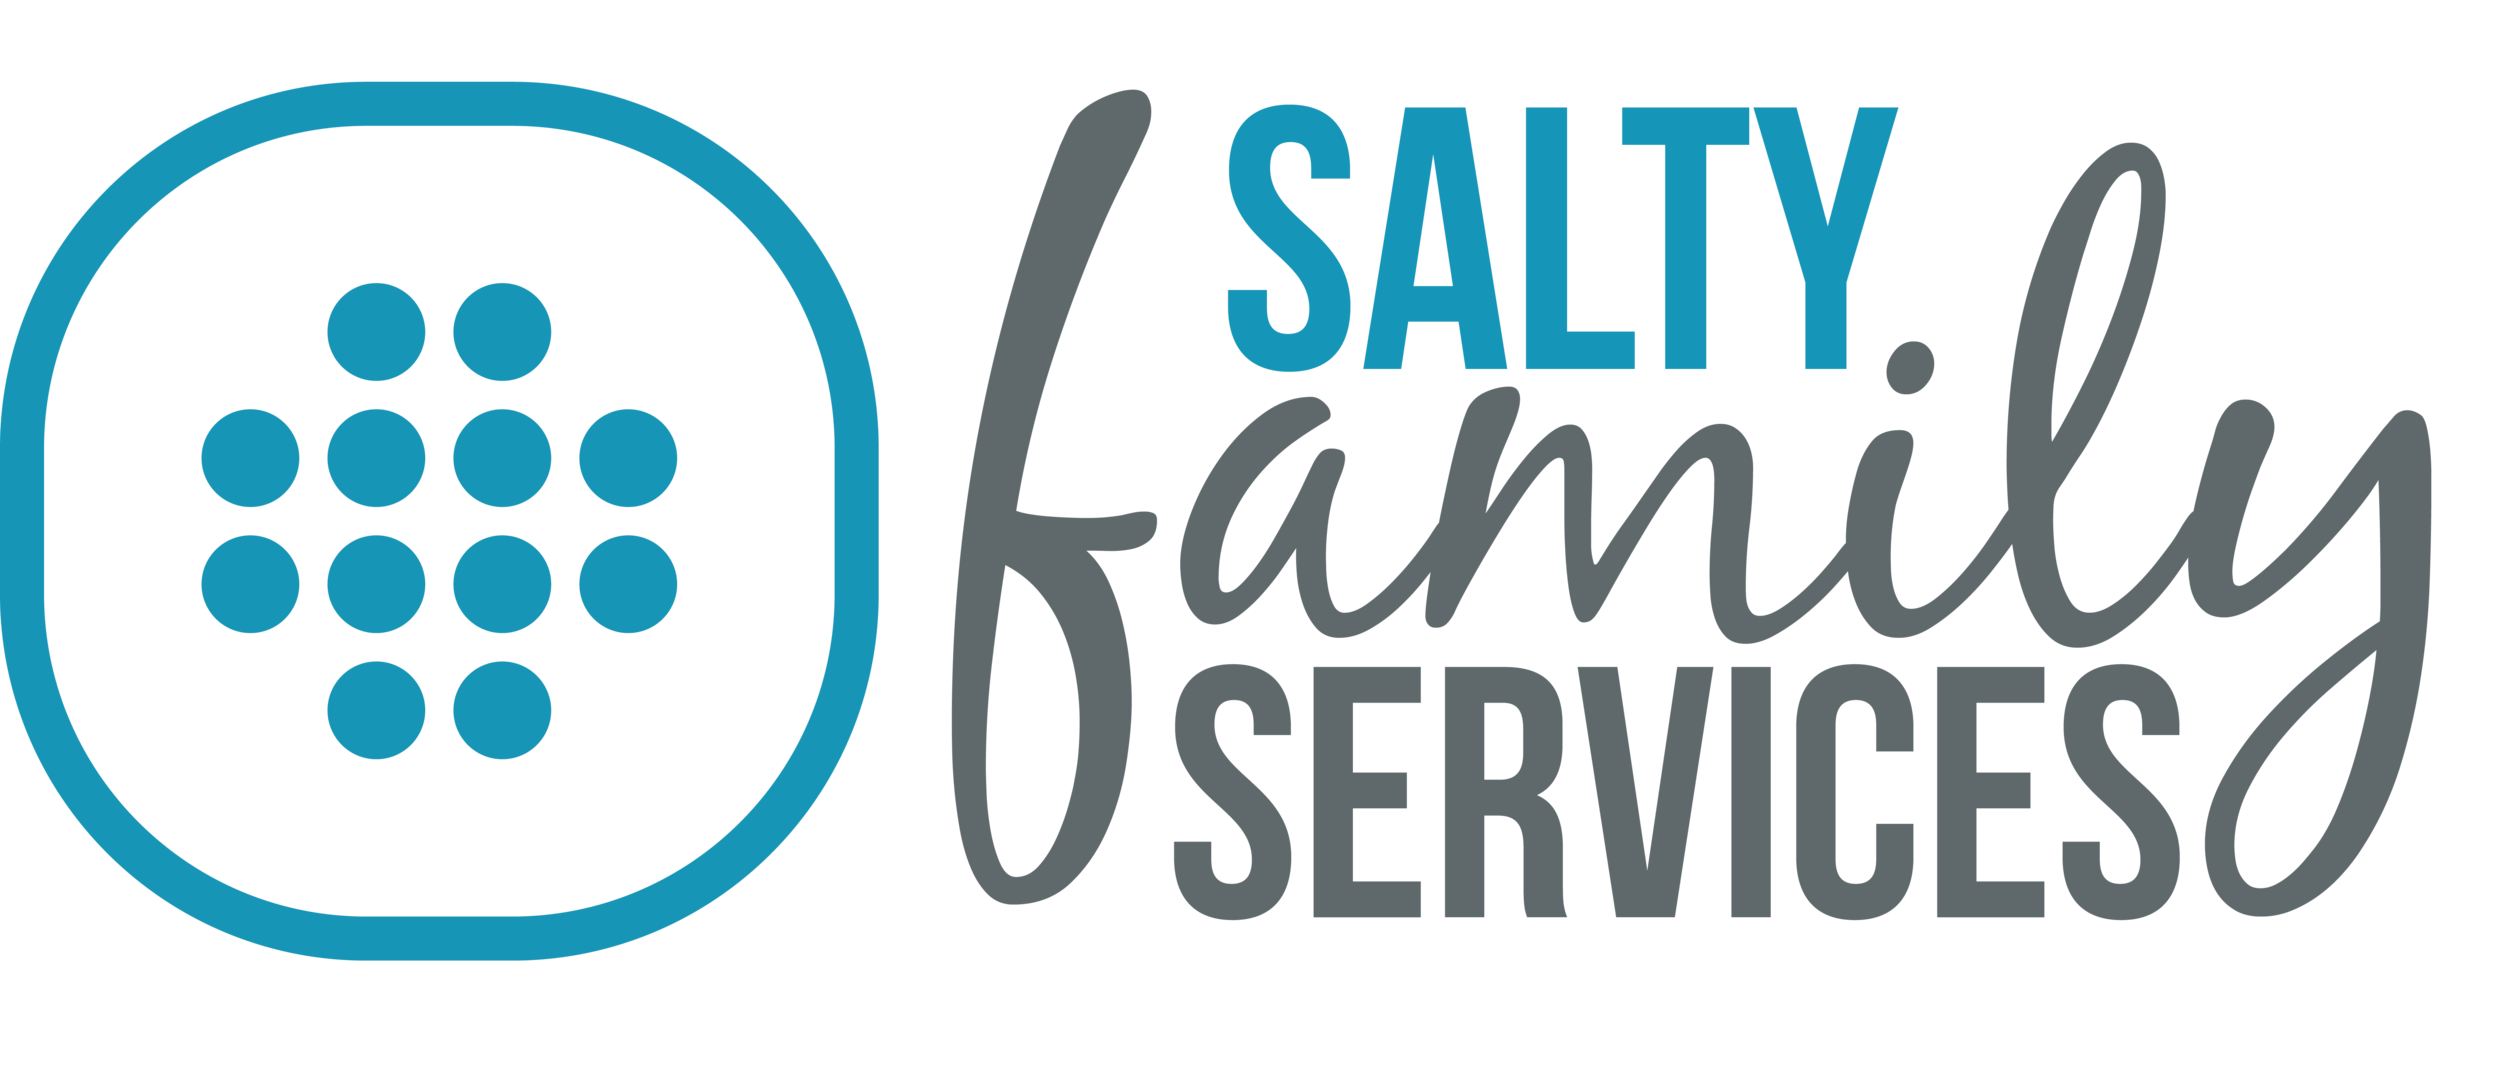 Salty Family Services